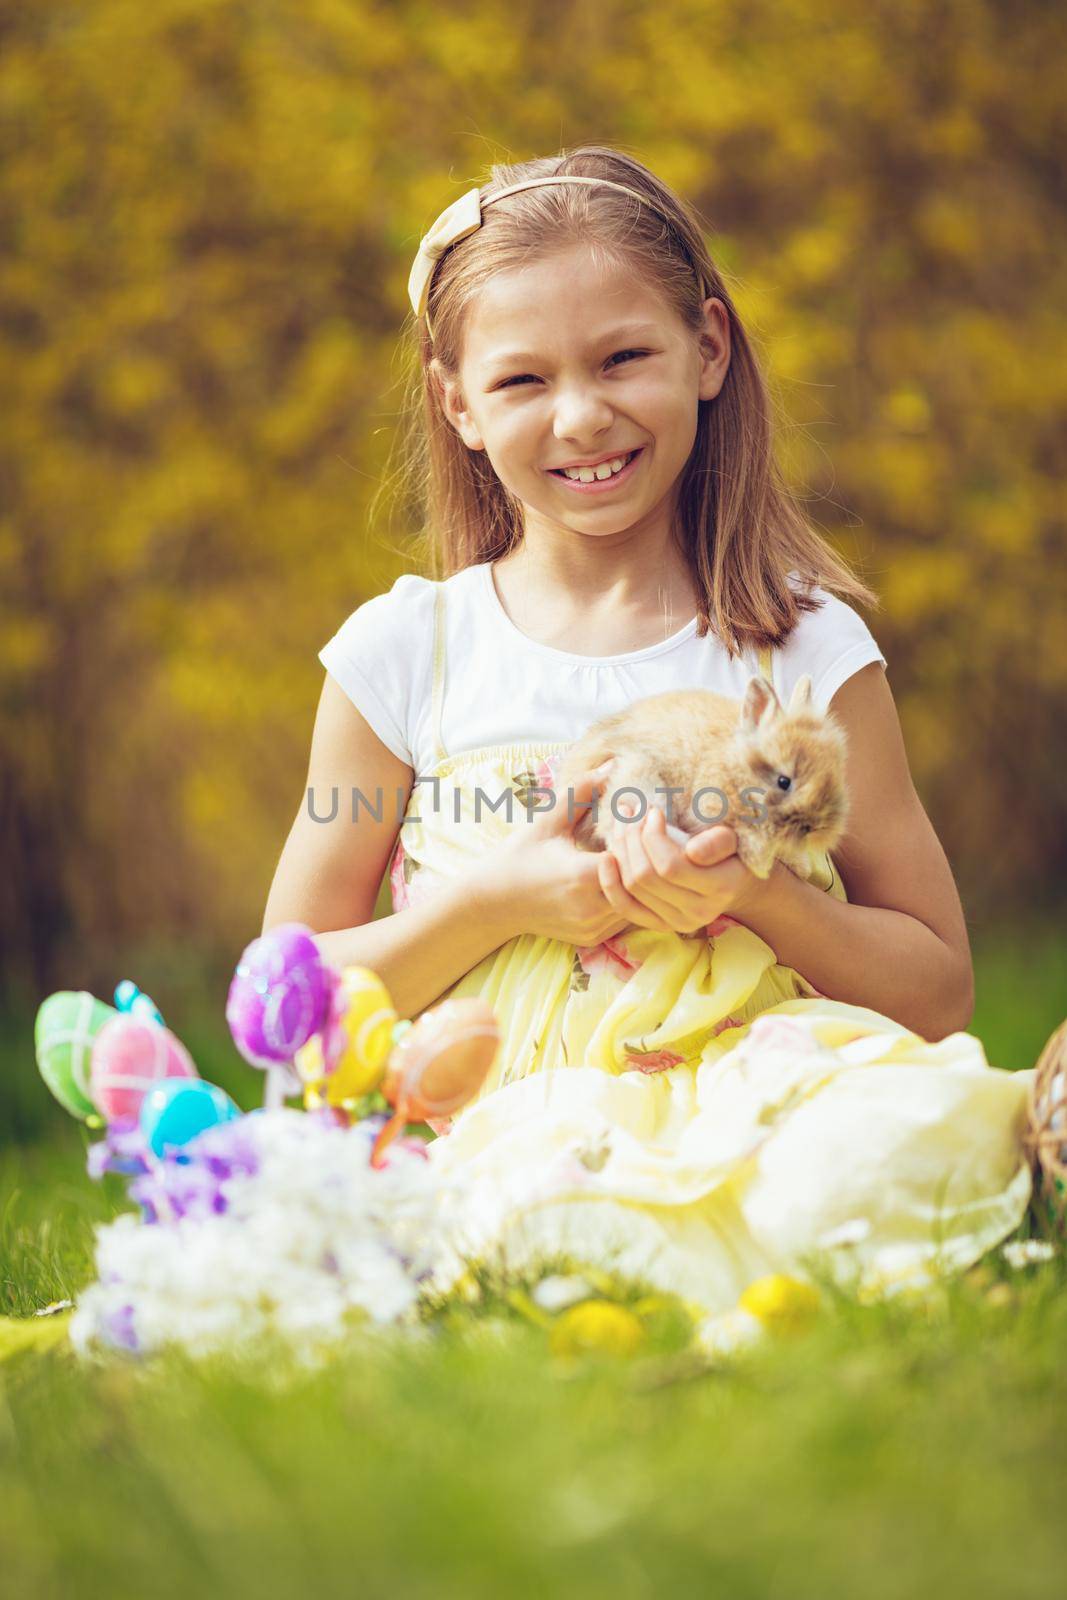 Easter Bunny And Little Girl by MilanMarkovic78